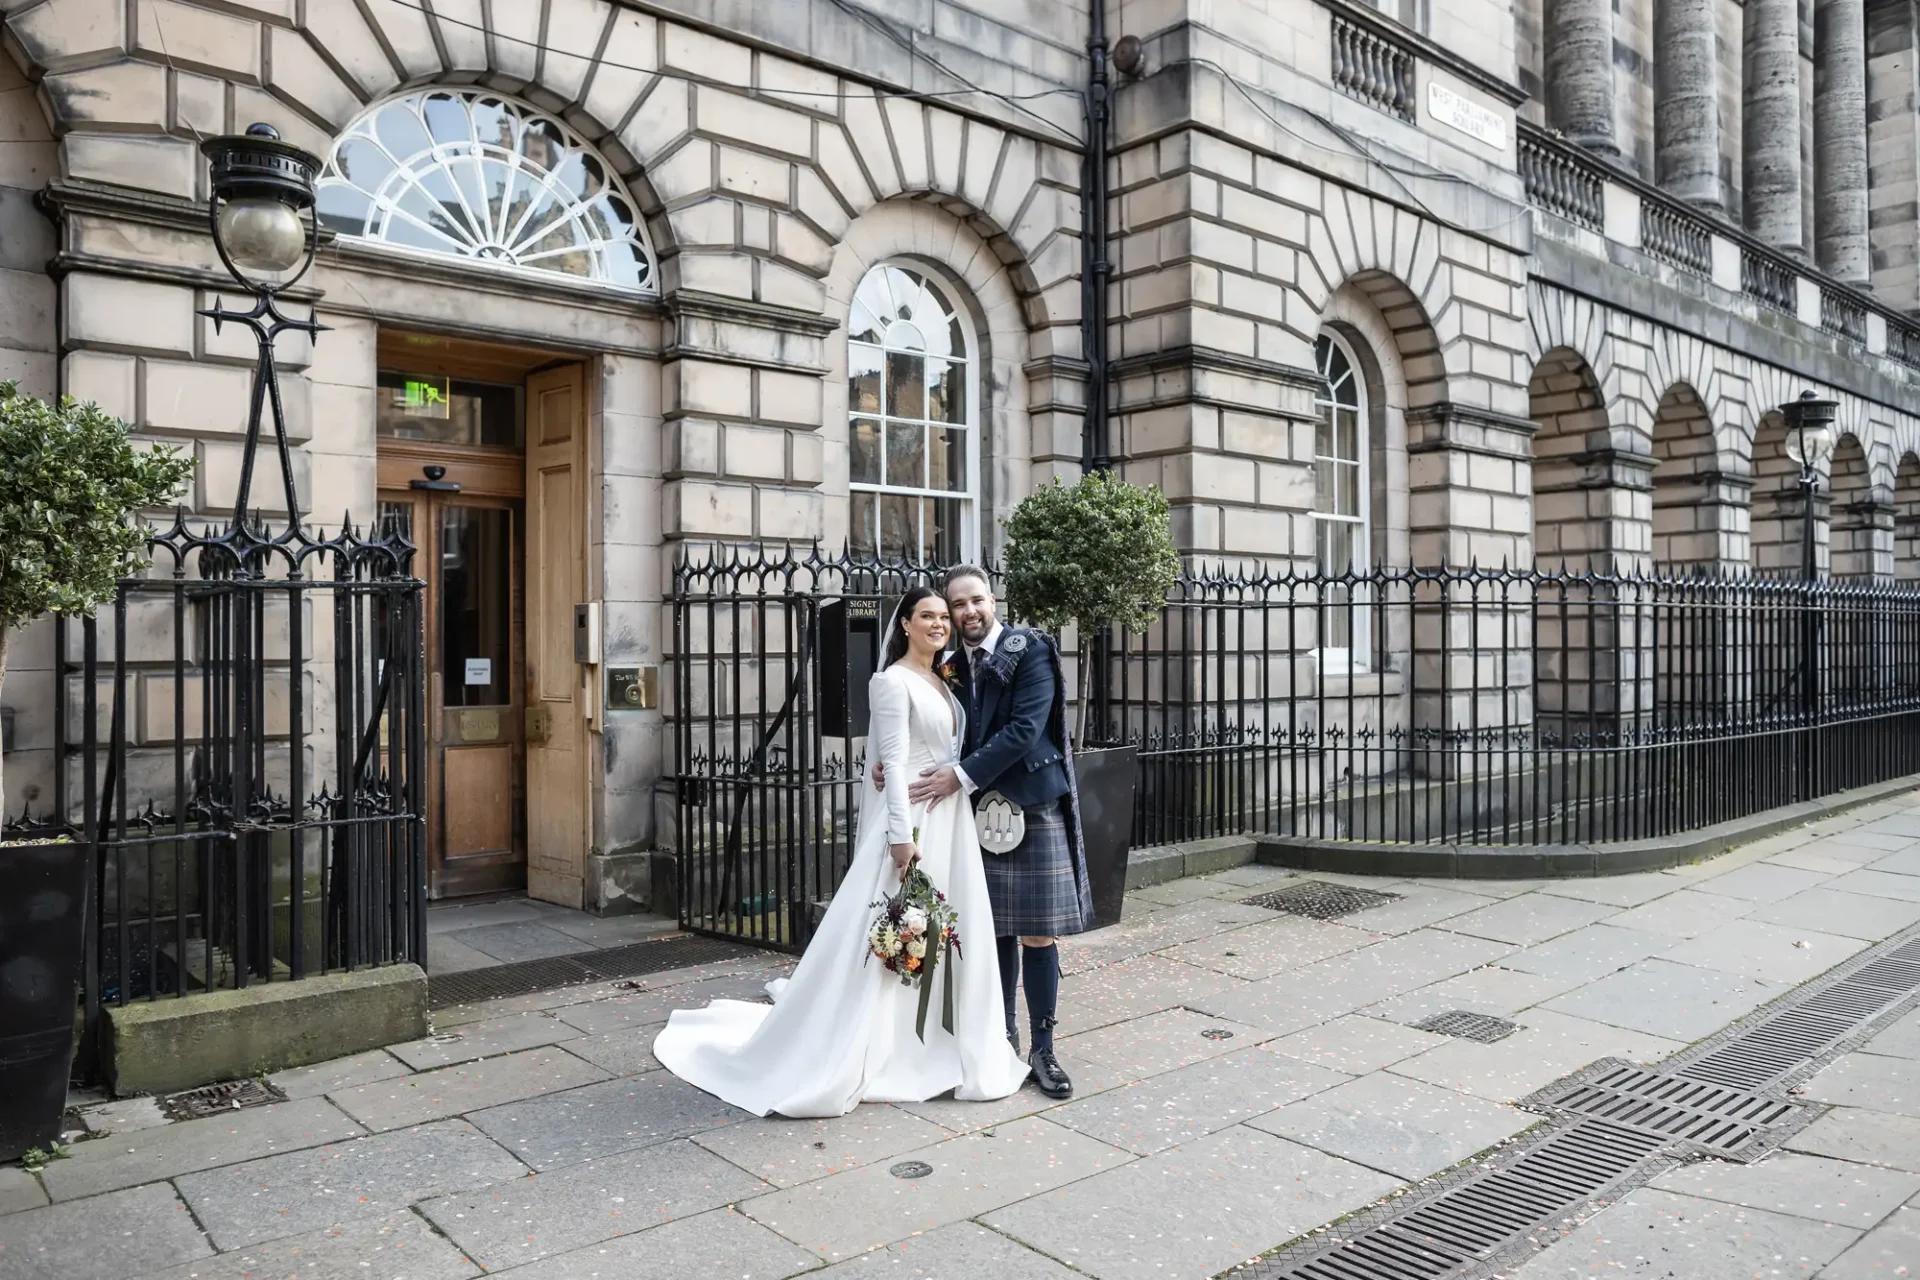 A bride and groom, the bride in a white dress and holding a bouquet, the groom in a kilt, smiling outside a grand stone building with columns and iron fences.